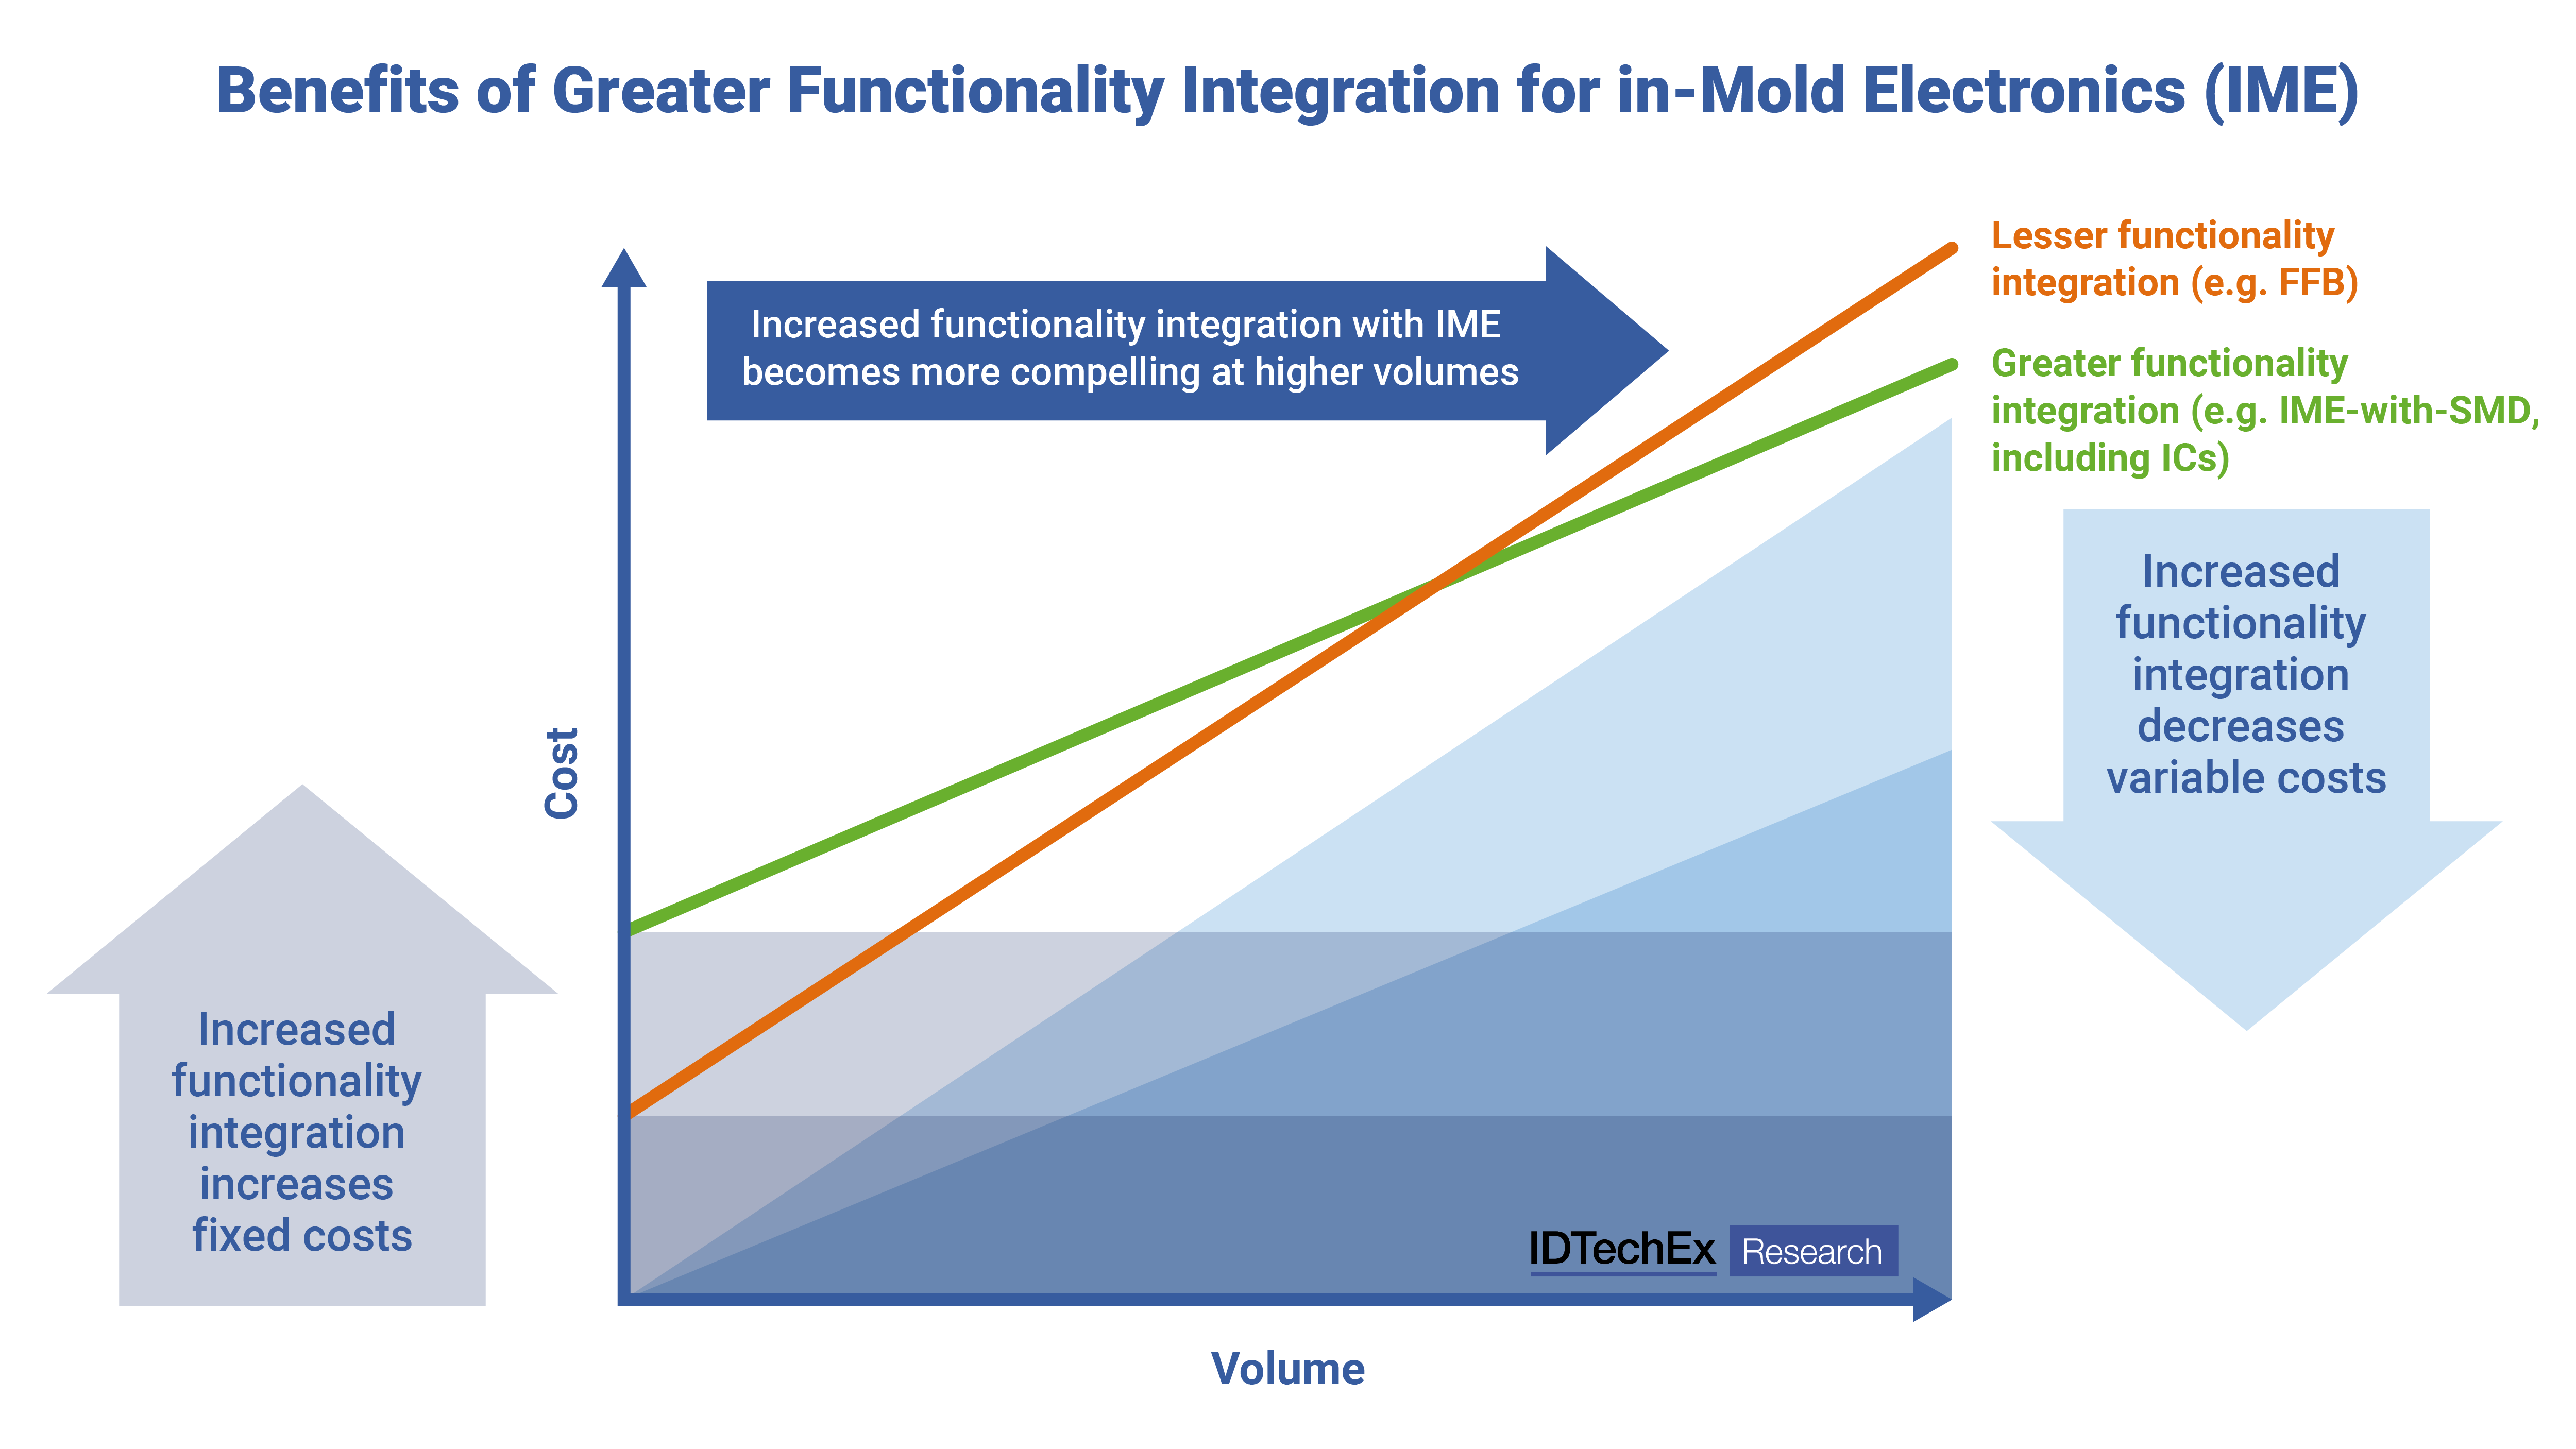 Benefits of greater functionality integration for in-mold electronics (IME). Source: IDTechEx